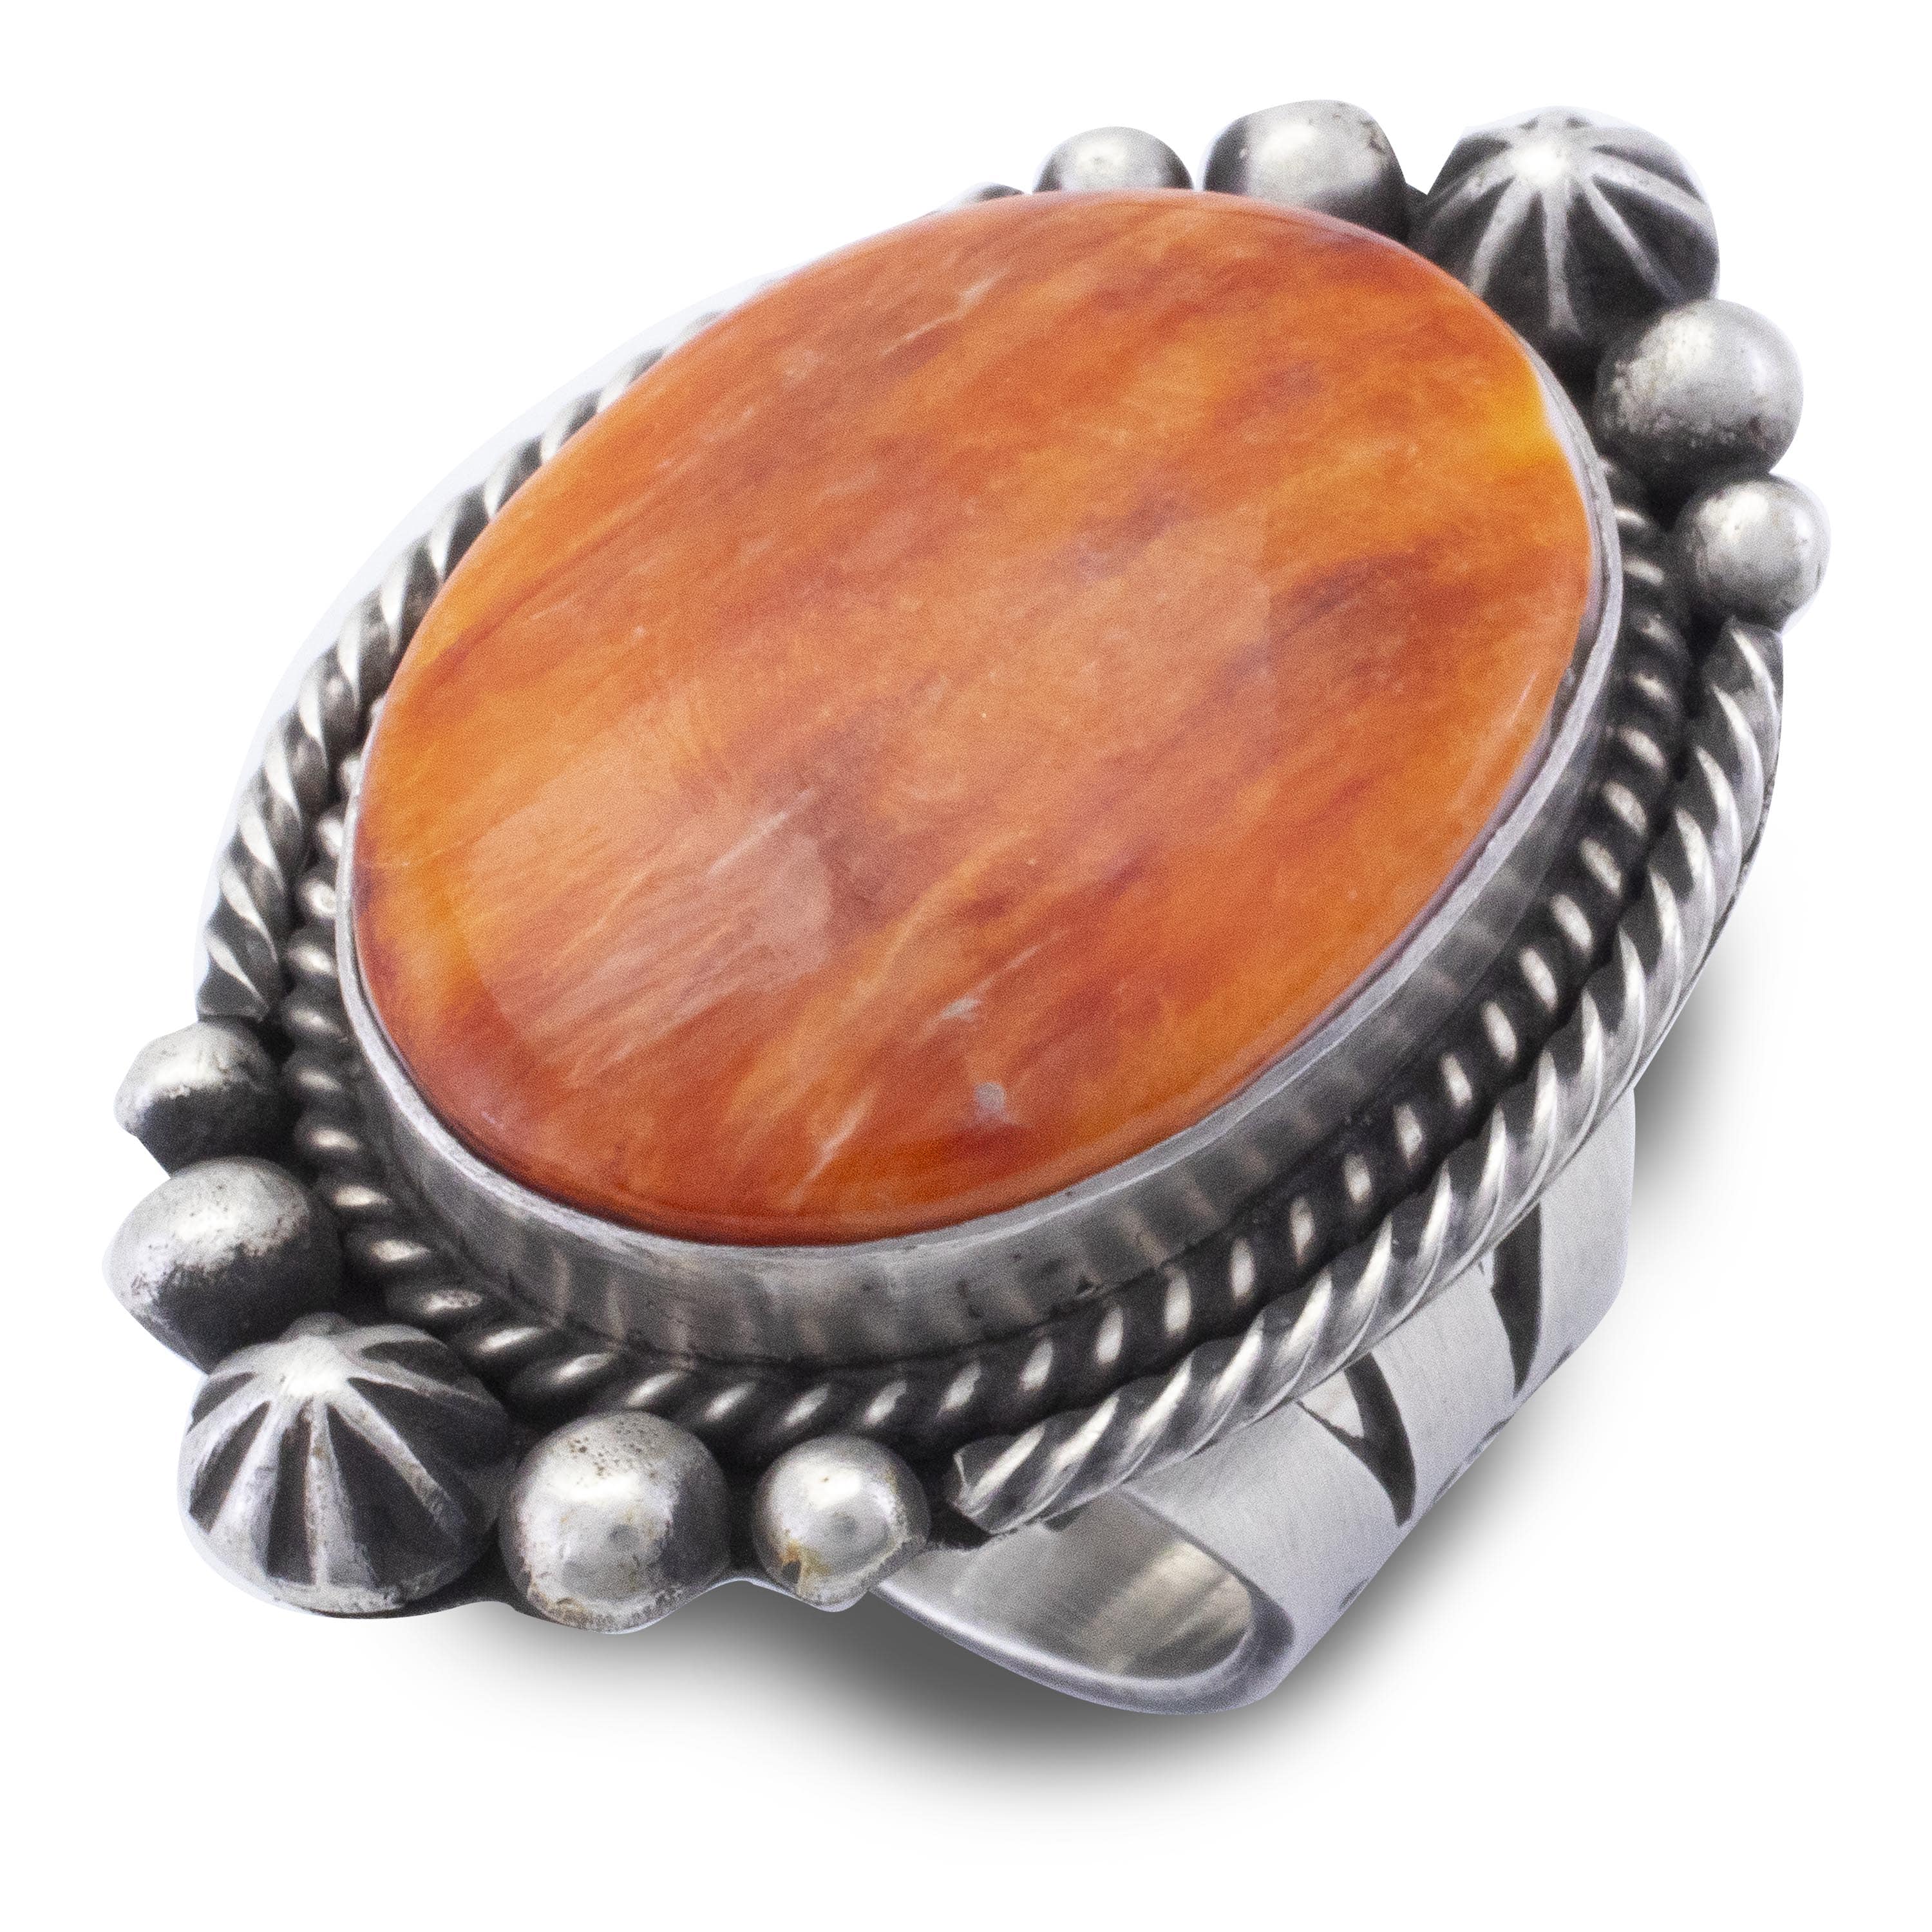 Kalifano Native American Jewelry 8 Randall Enditto Navajo Orange Spiny Oyster Shell USA Native American Made 925 Sterling Silver Ring NAR1200.038.8